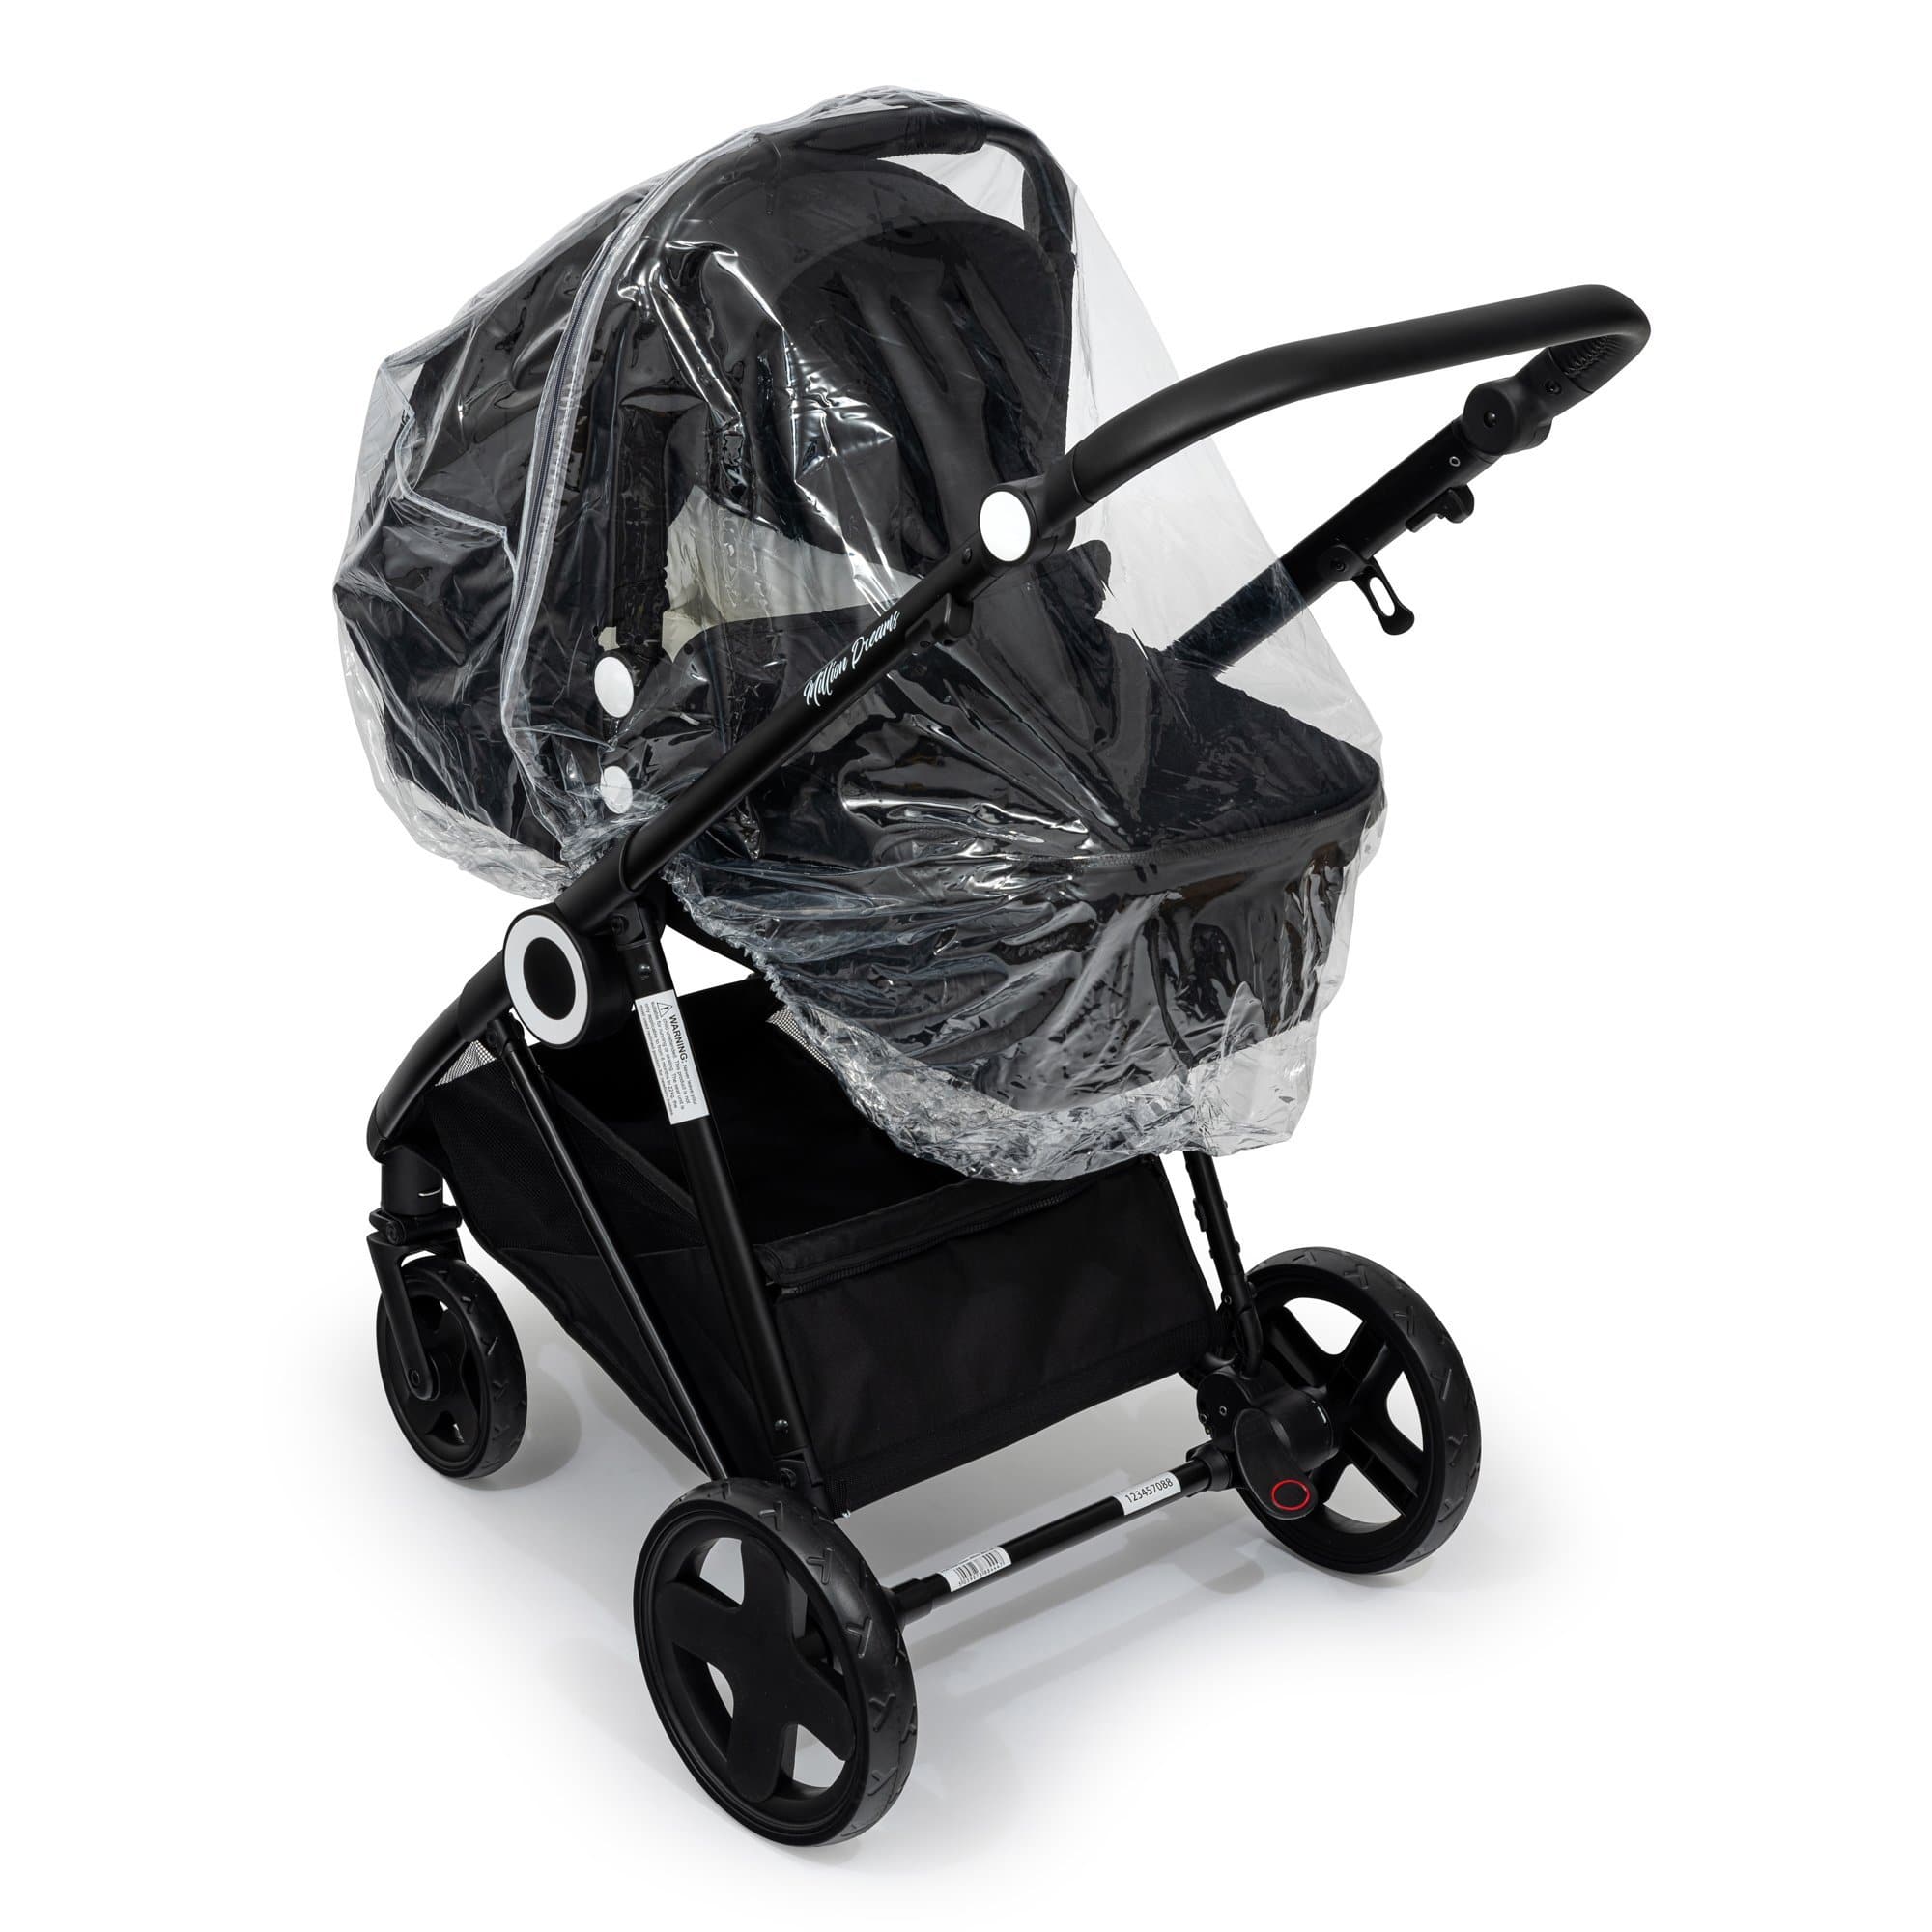 2 in 1 Rain Cover Compatible with Recaro - Fits All Models - For Your Little One